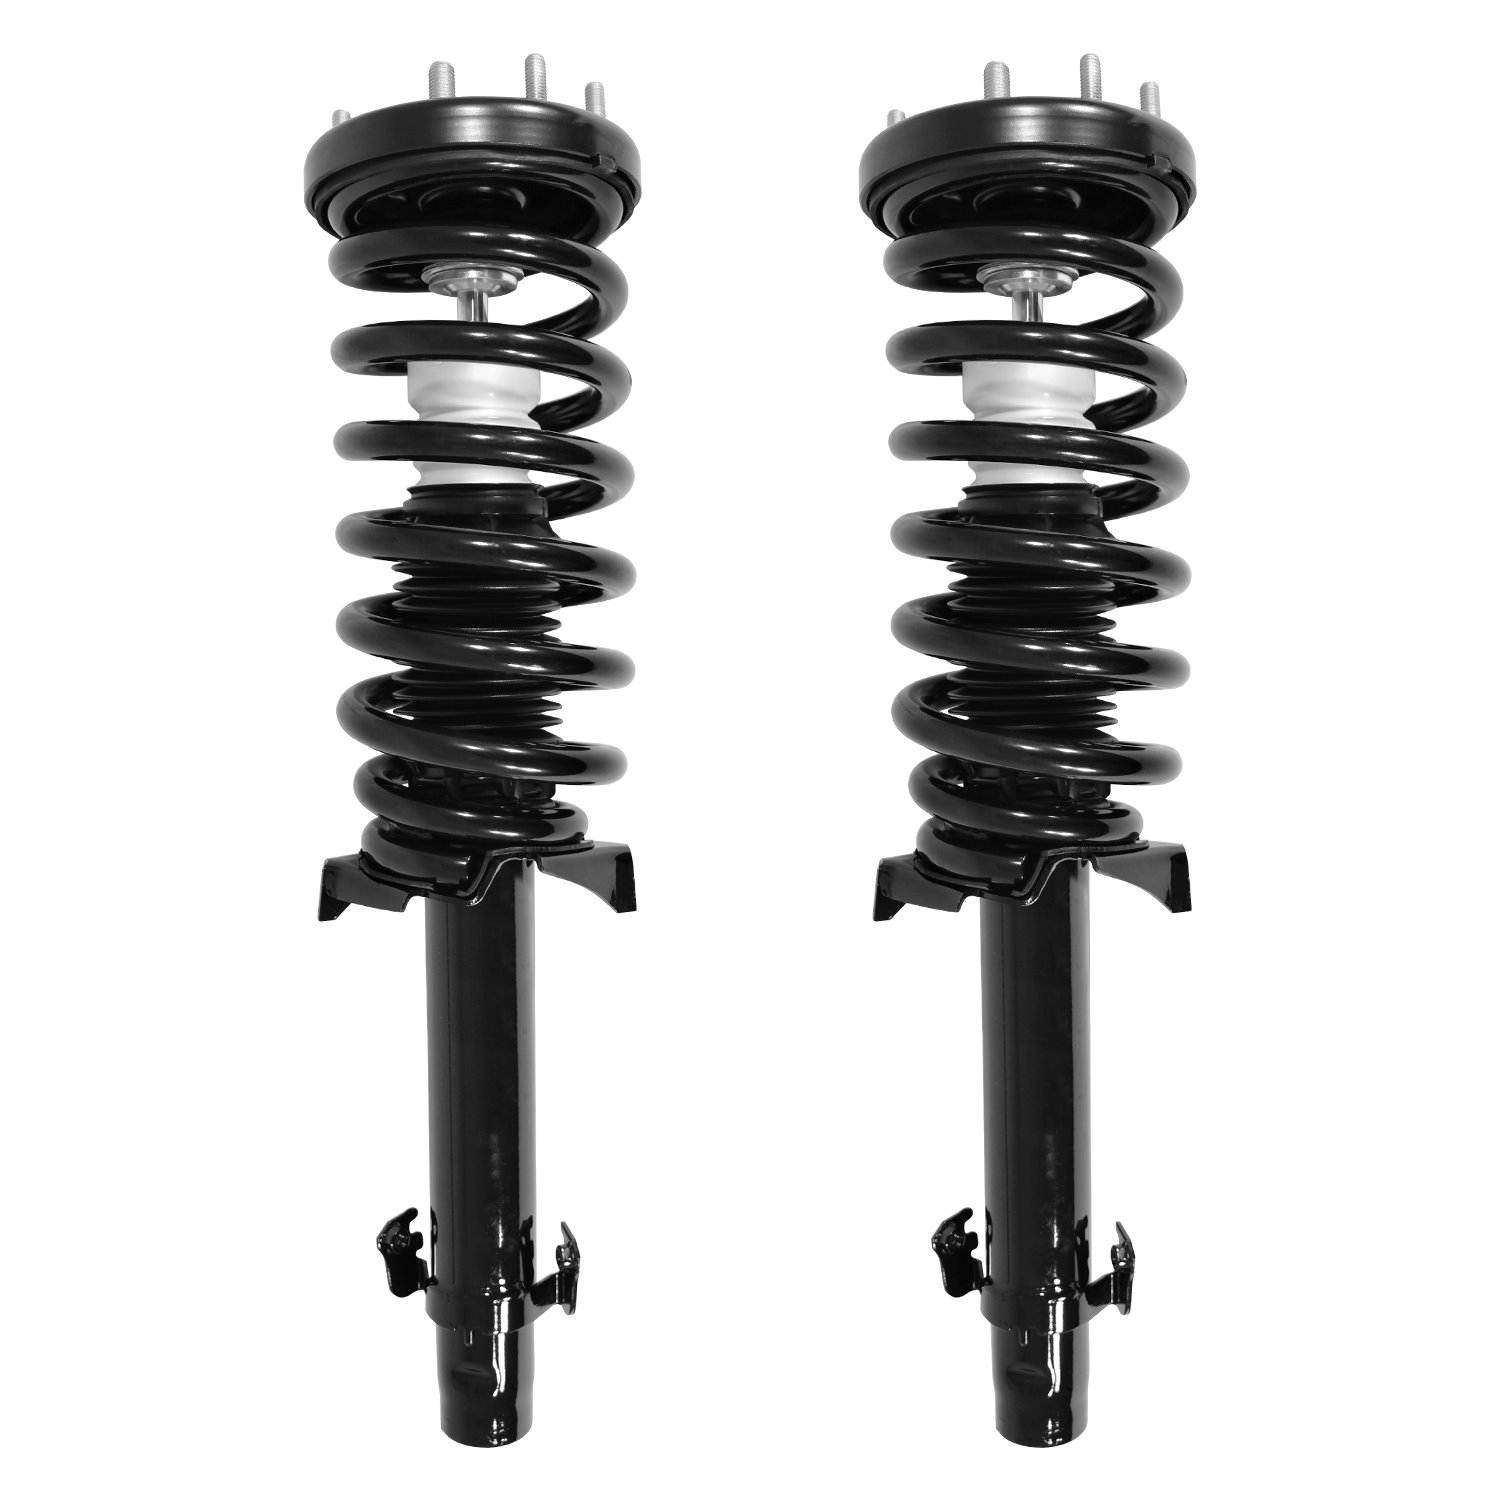 2-11235-11236-001 Suspension Strut & Coil Spring Assembly Set Fits Select Honda Accord